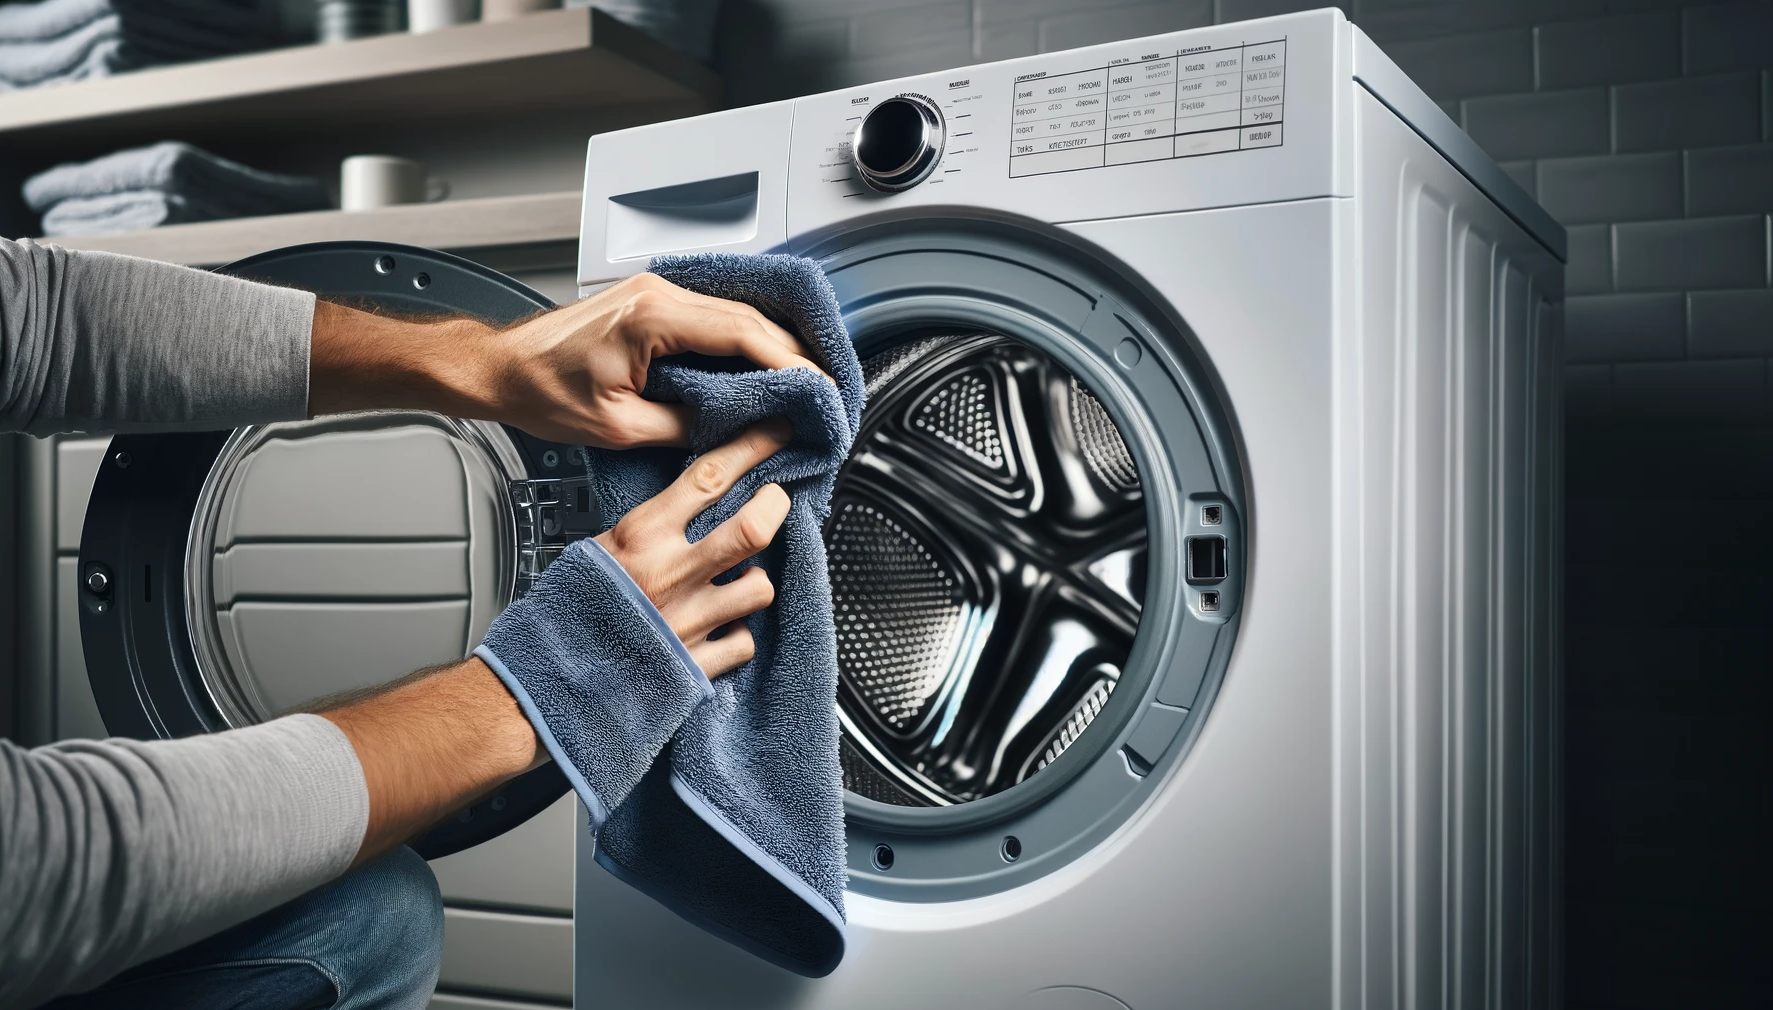 DIY Tips to Extend the Life of Your Appliances